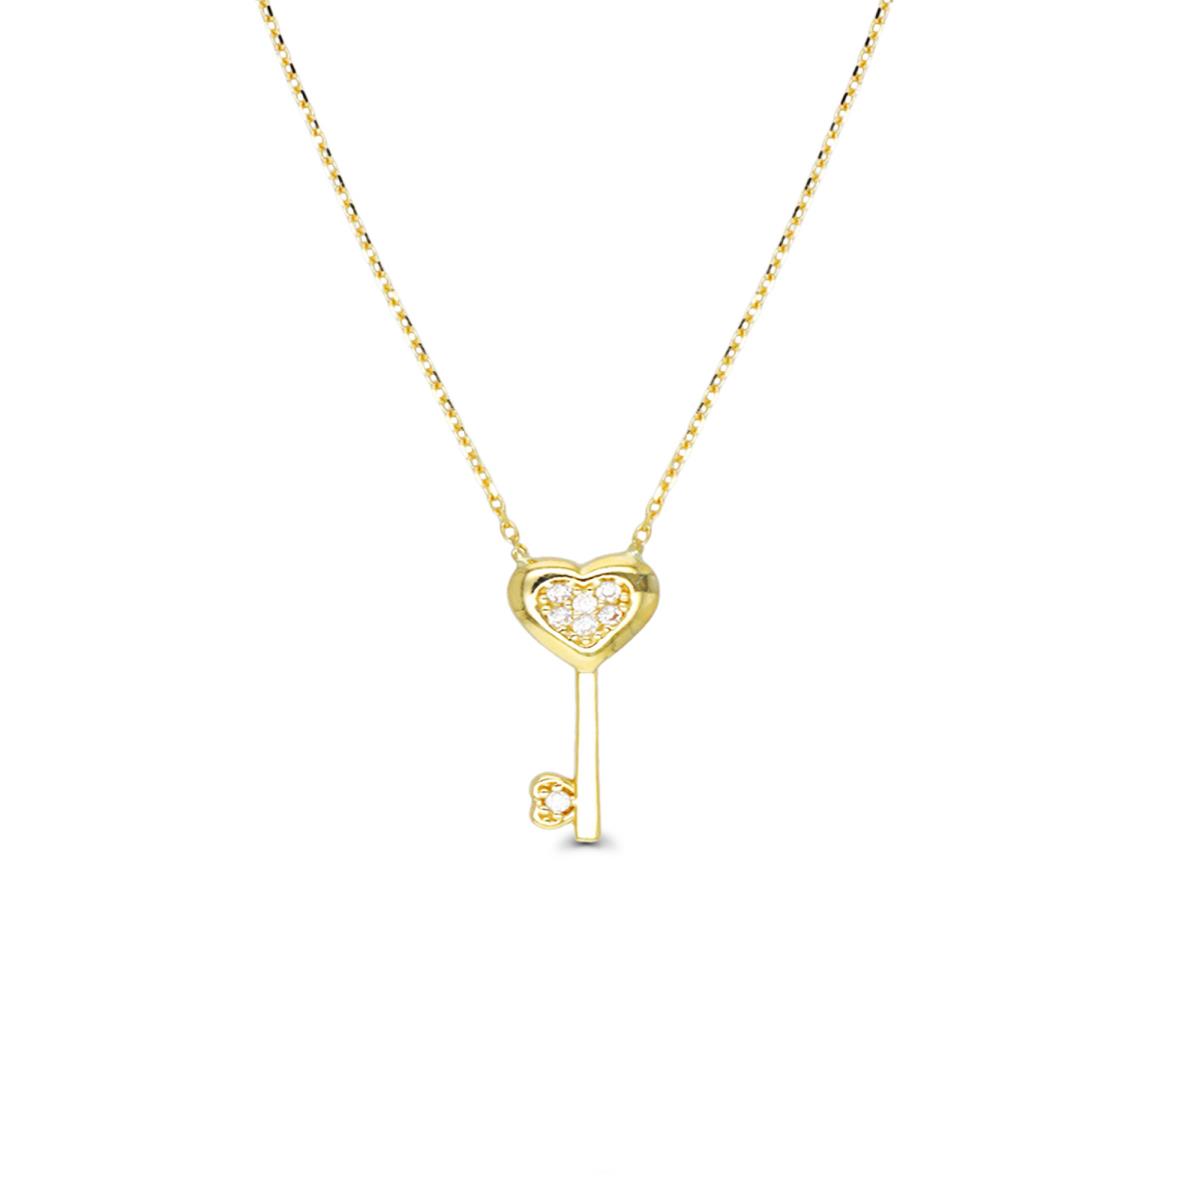 14K Yellow Gold Heart Key 16"+2" Necklace